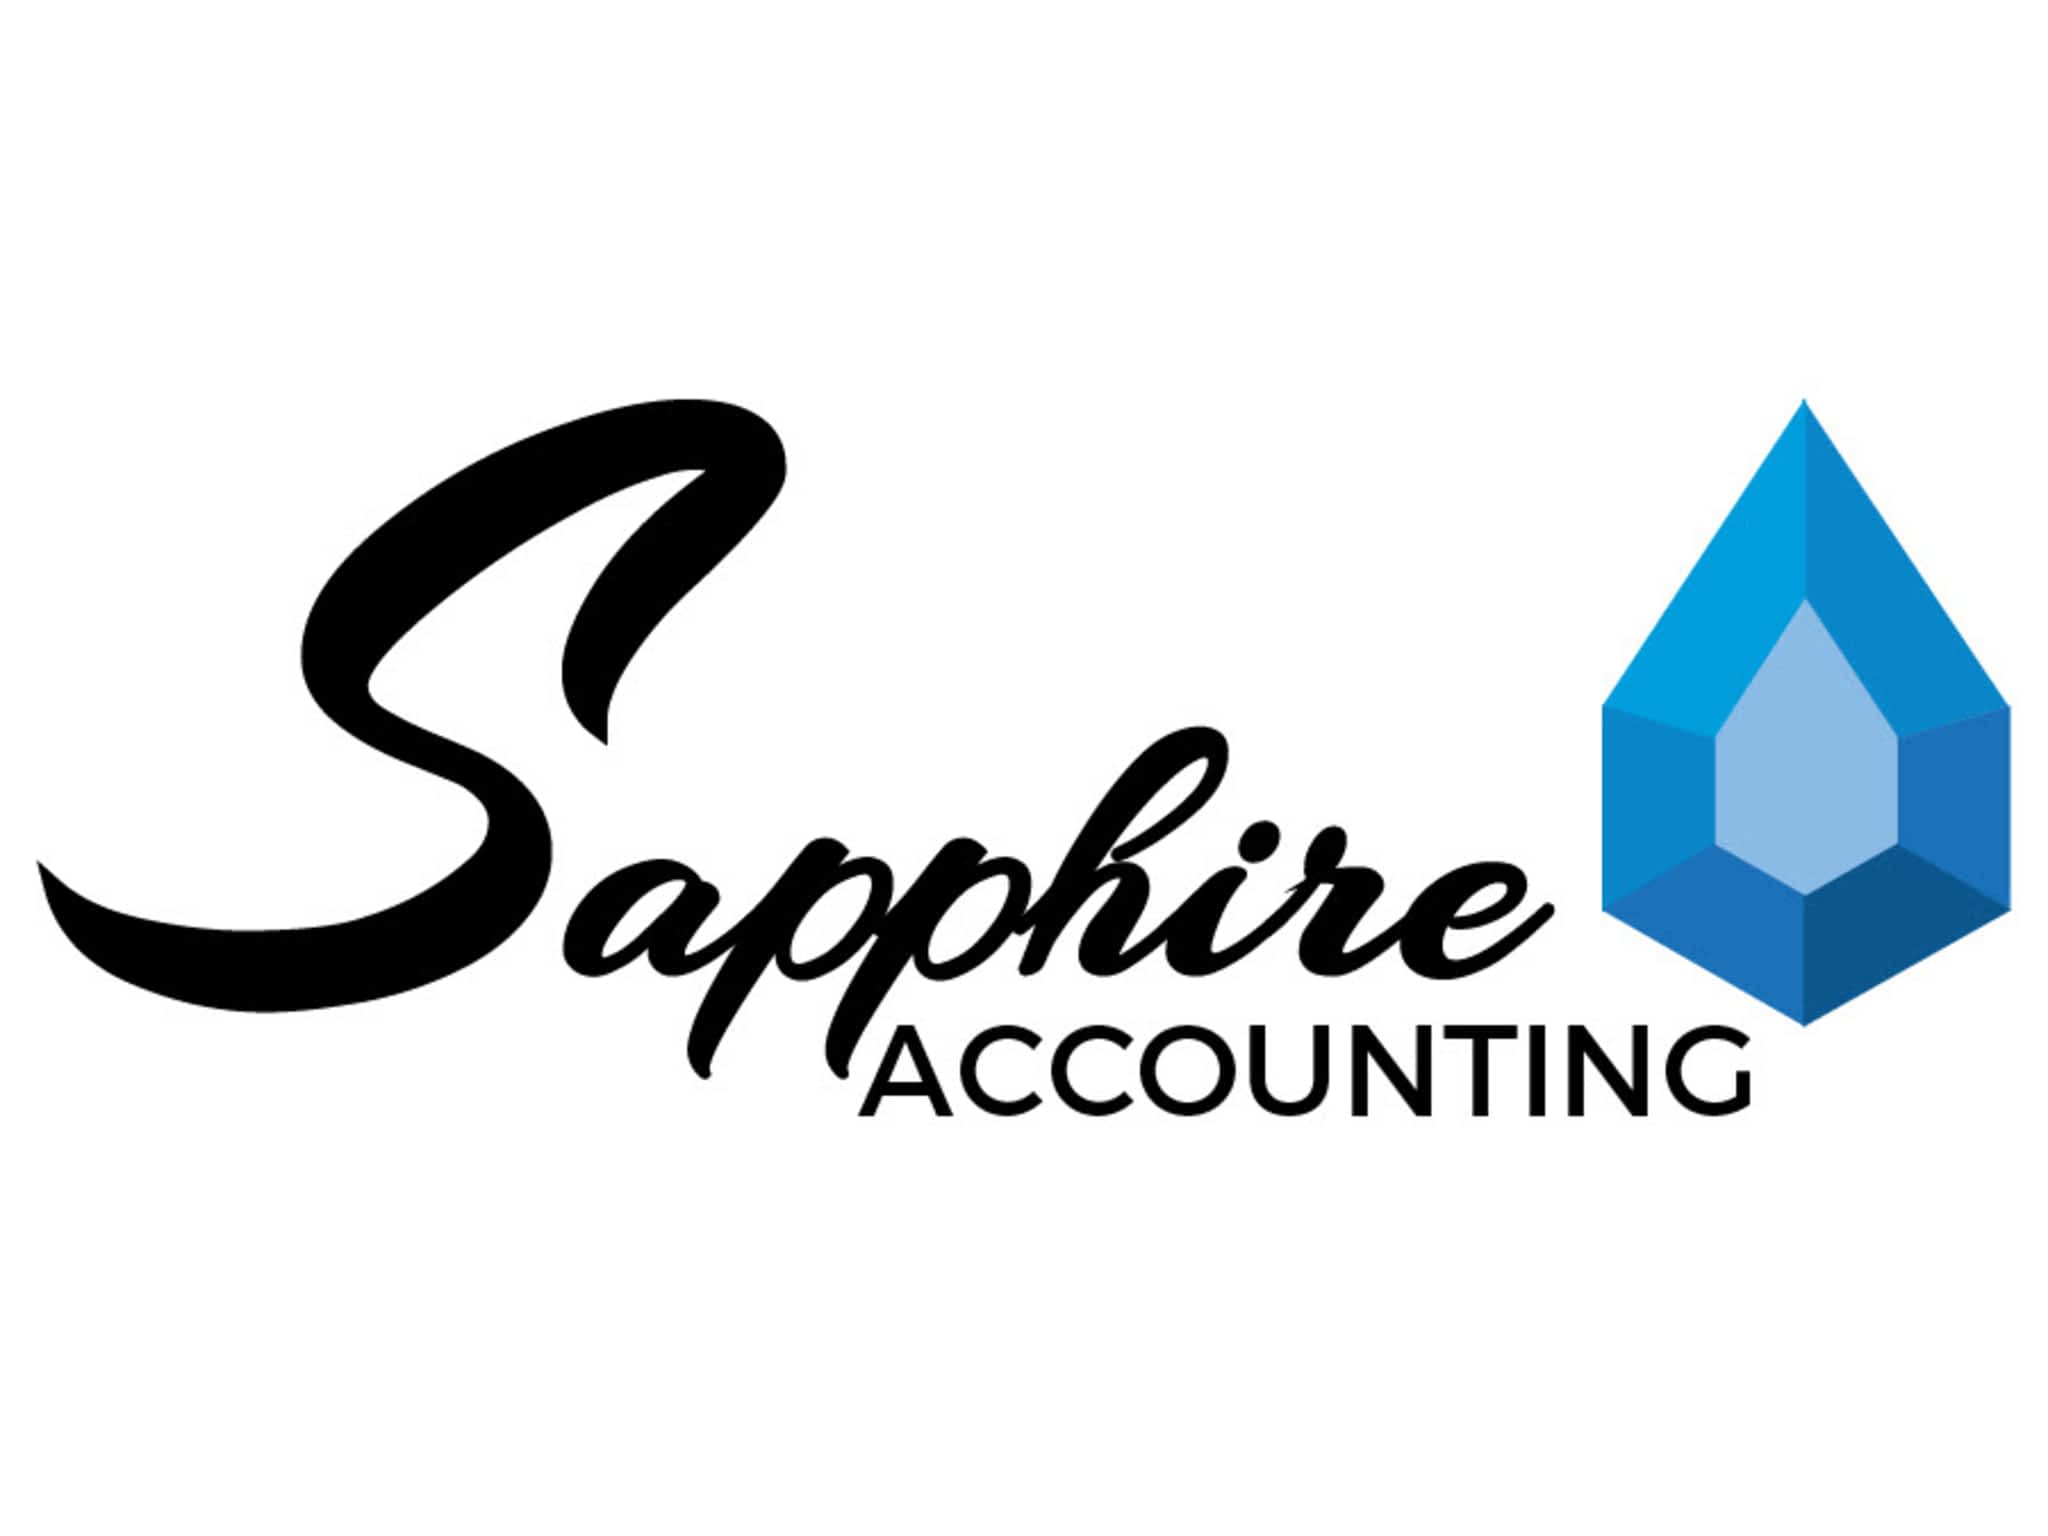 photo Sapphire Accounting Services Inc